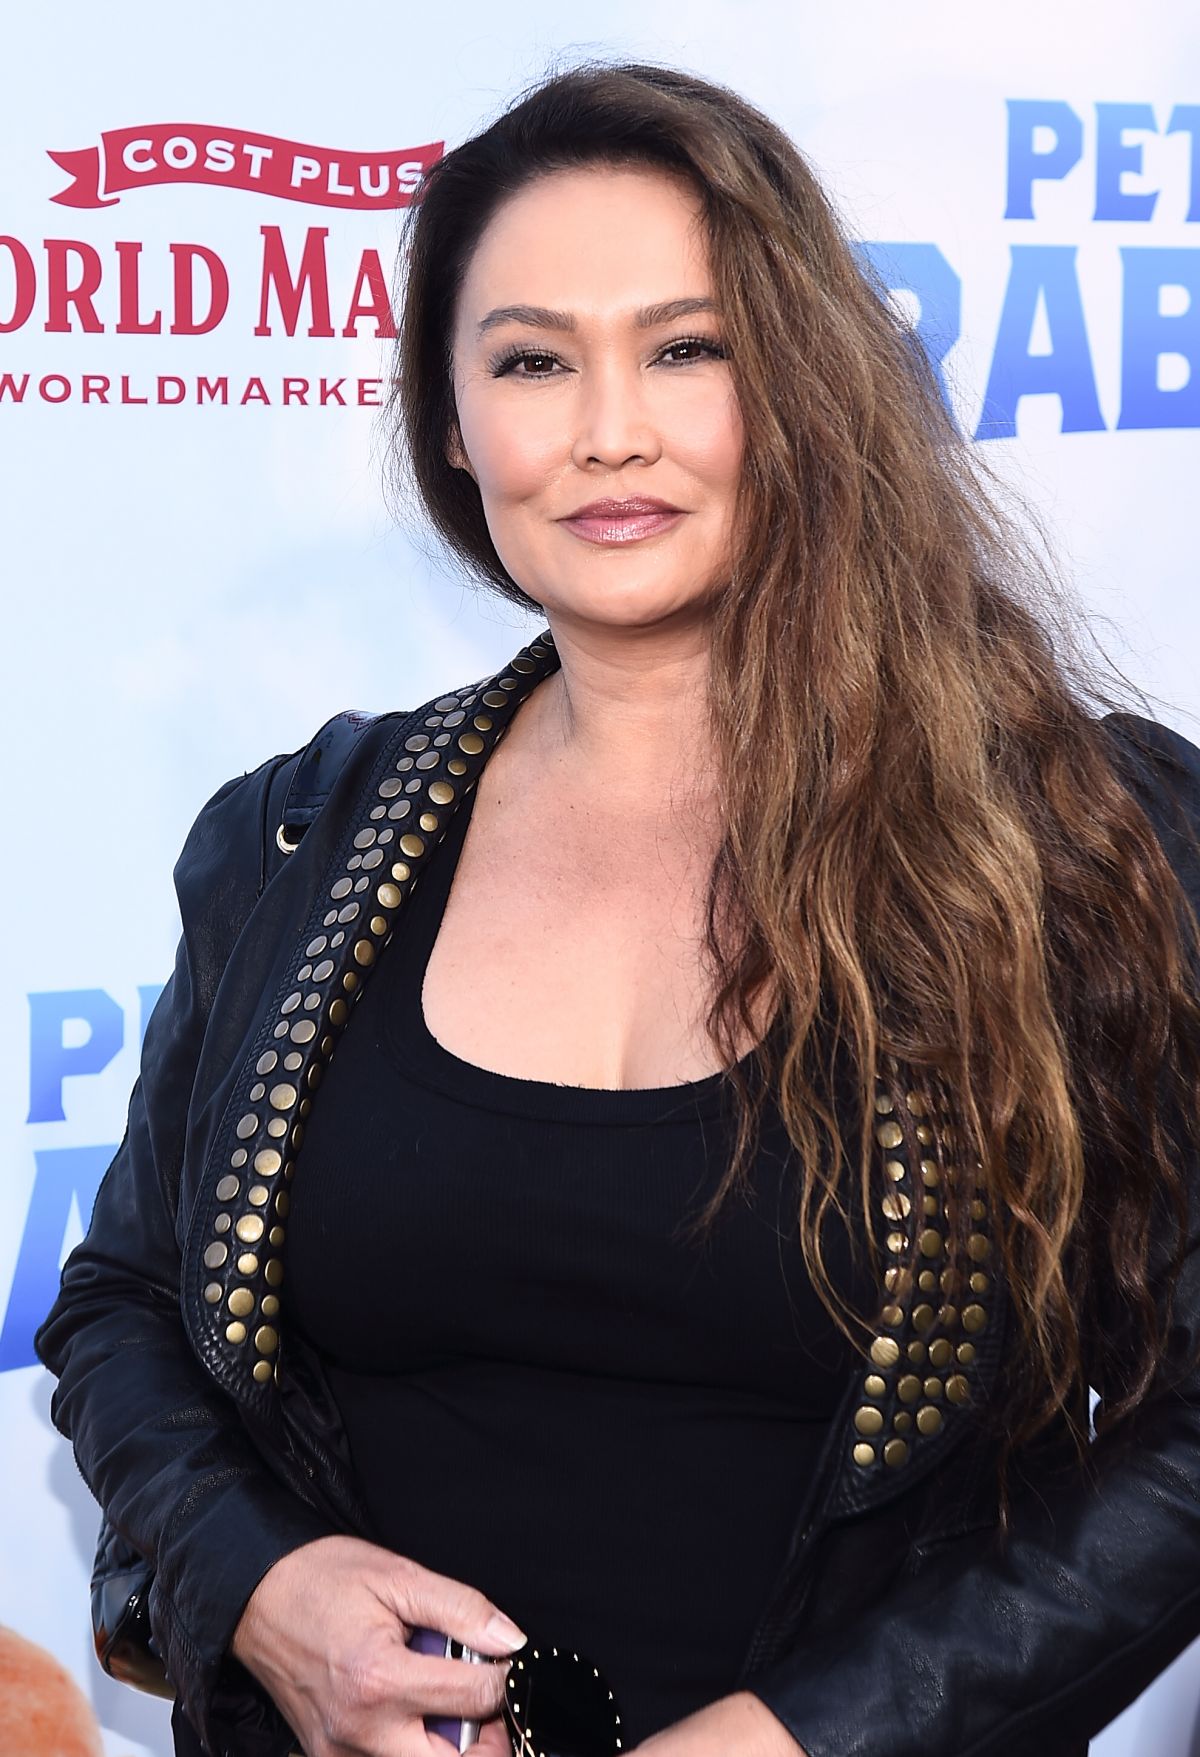 TIA CARRERE At Peter Rabbit Premiere In Los Angeles 02 03 2018